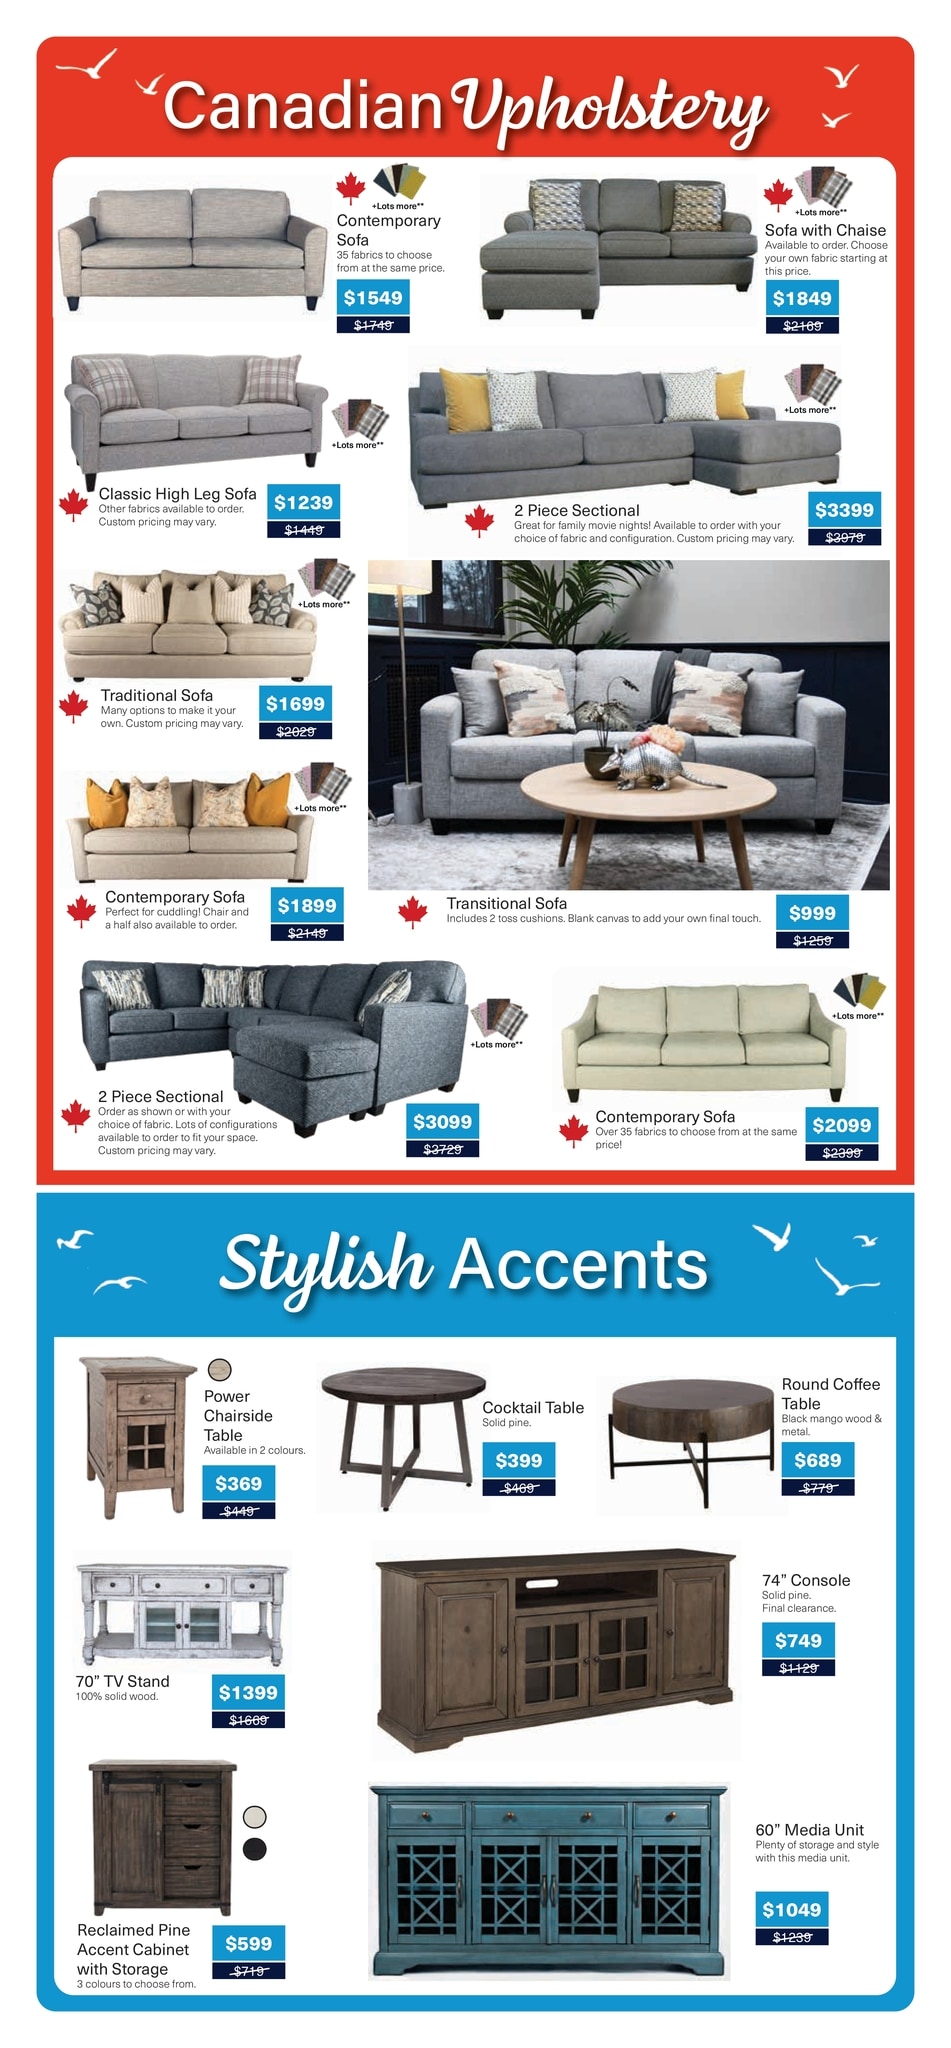 Bennett's Furniture and Mattresses - Monthly Savings - Page 3